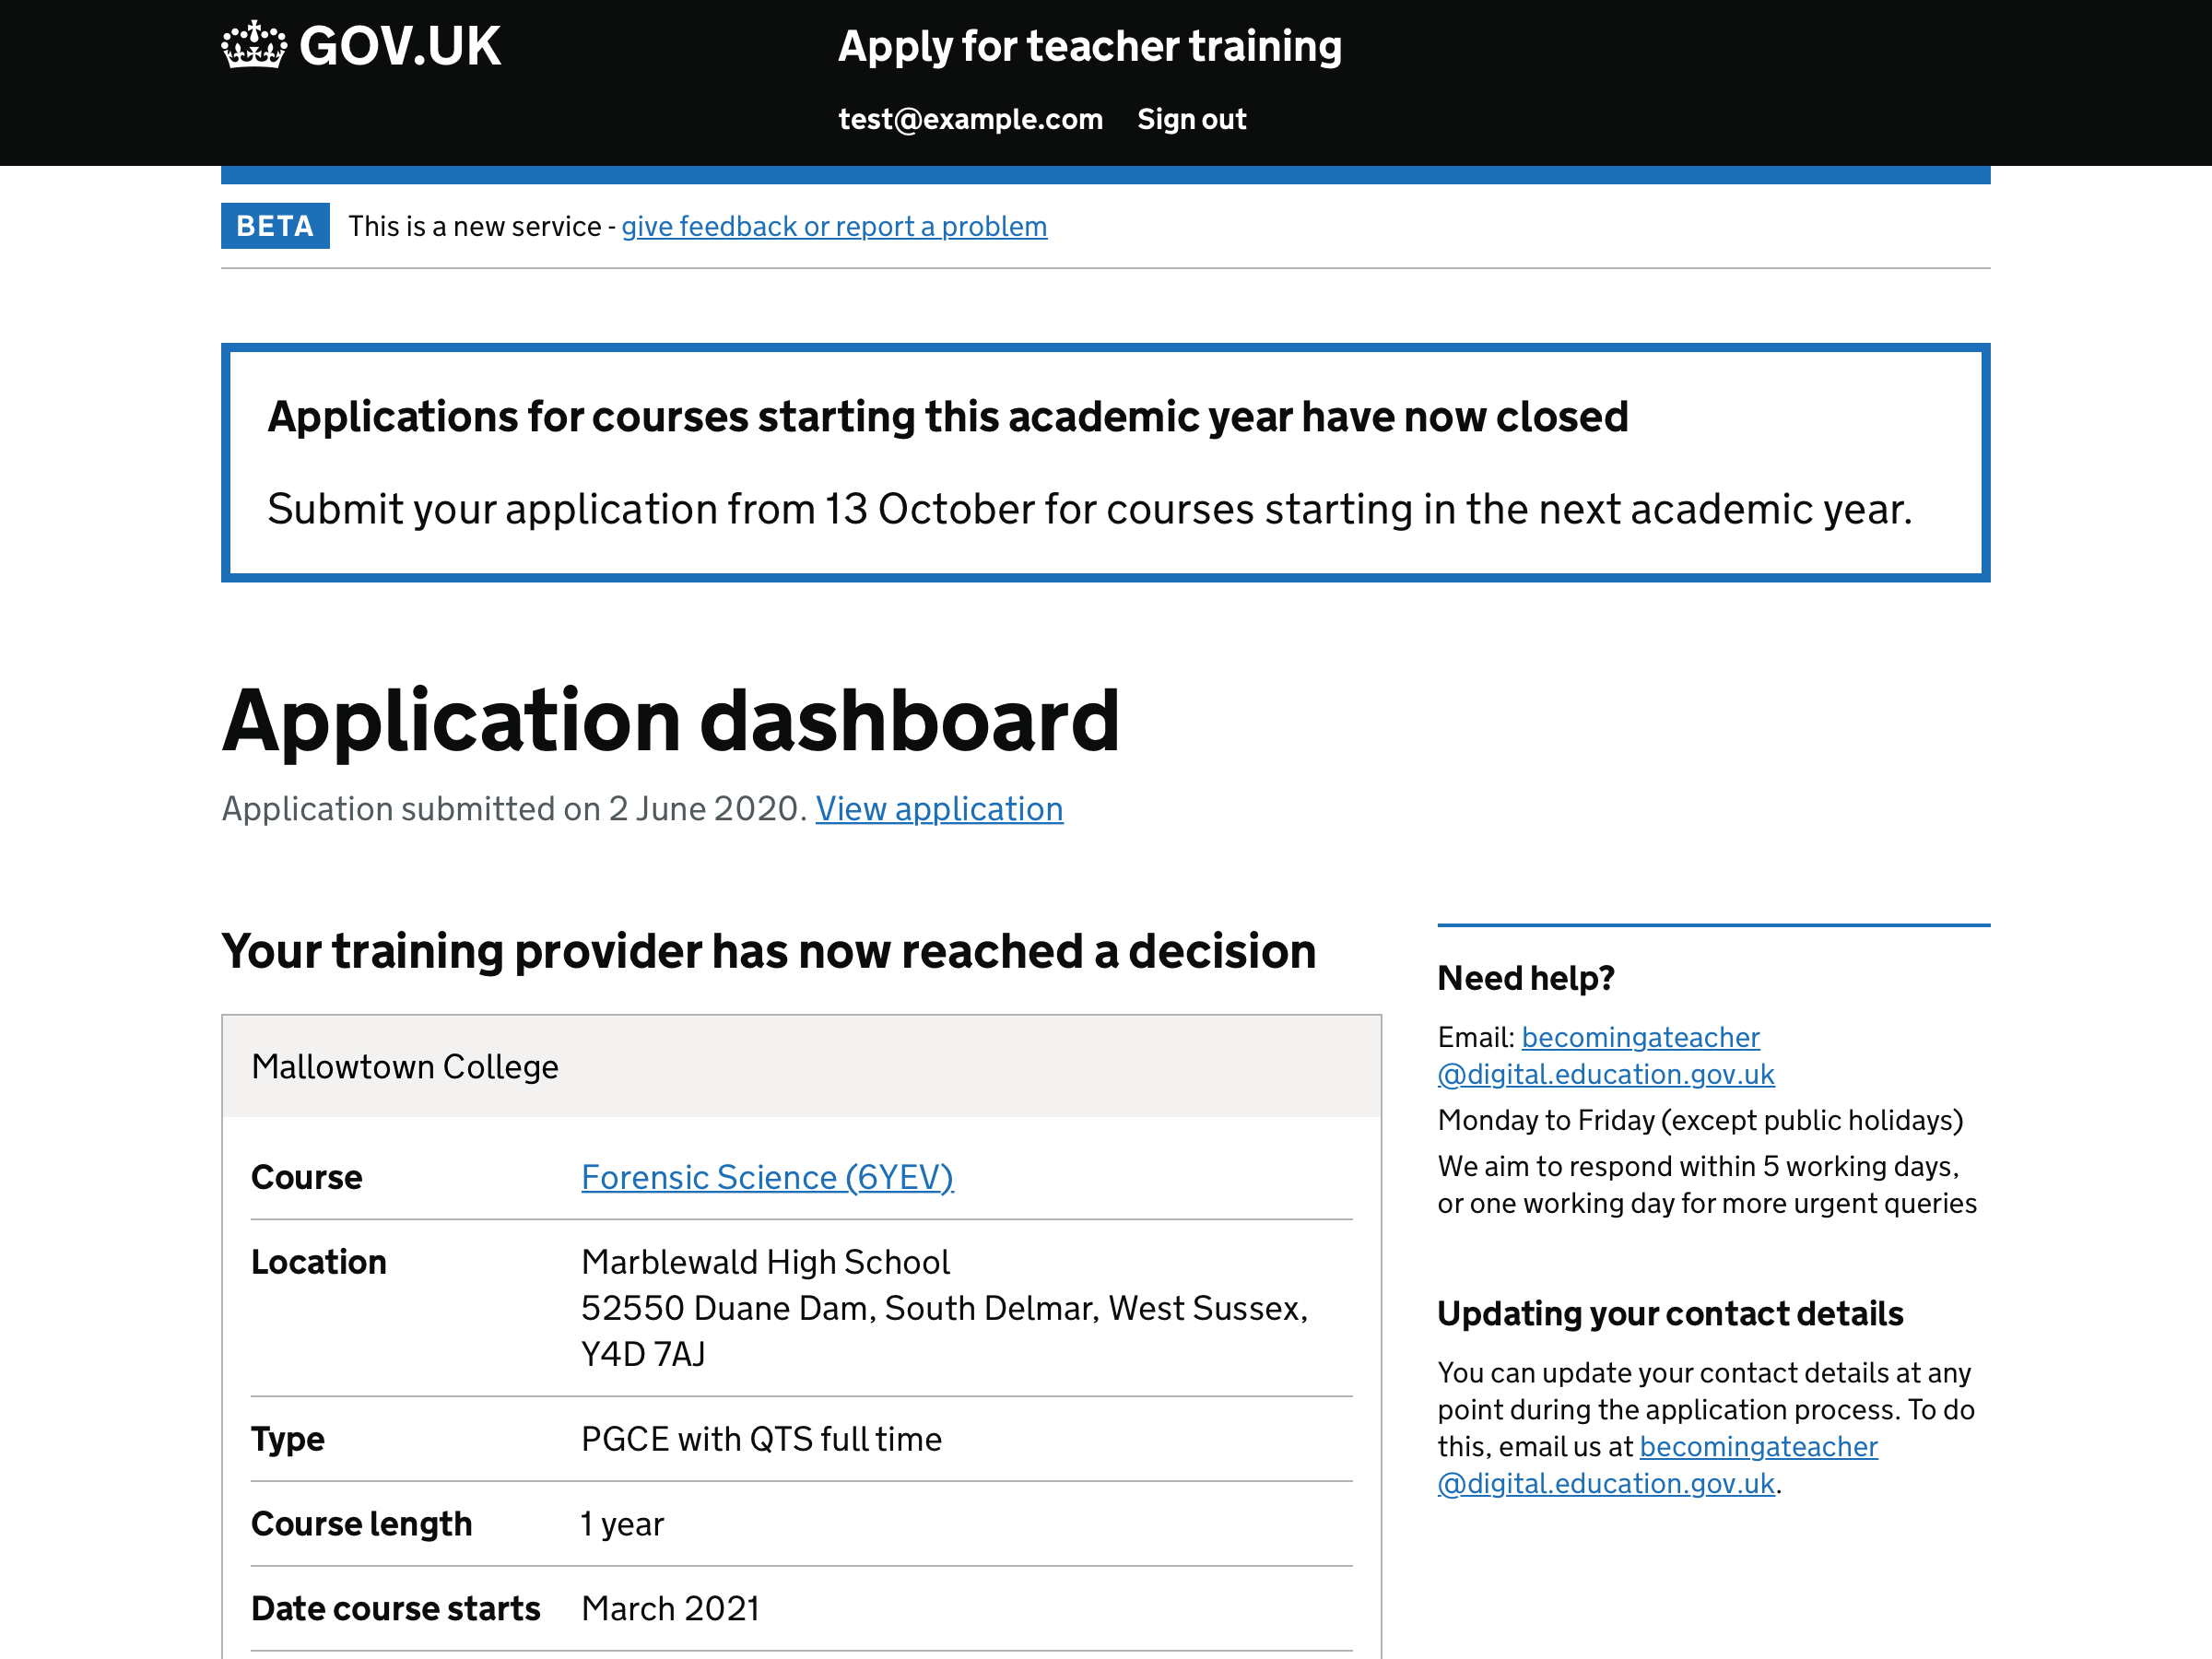 Screenshot of a banner informing candidates that applications for courses starting in this academic year have now closed.